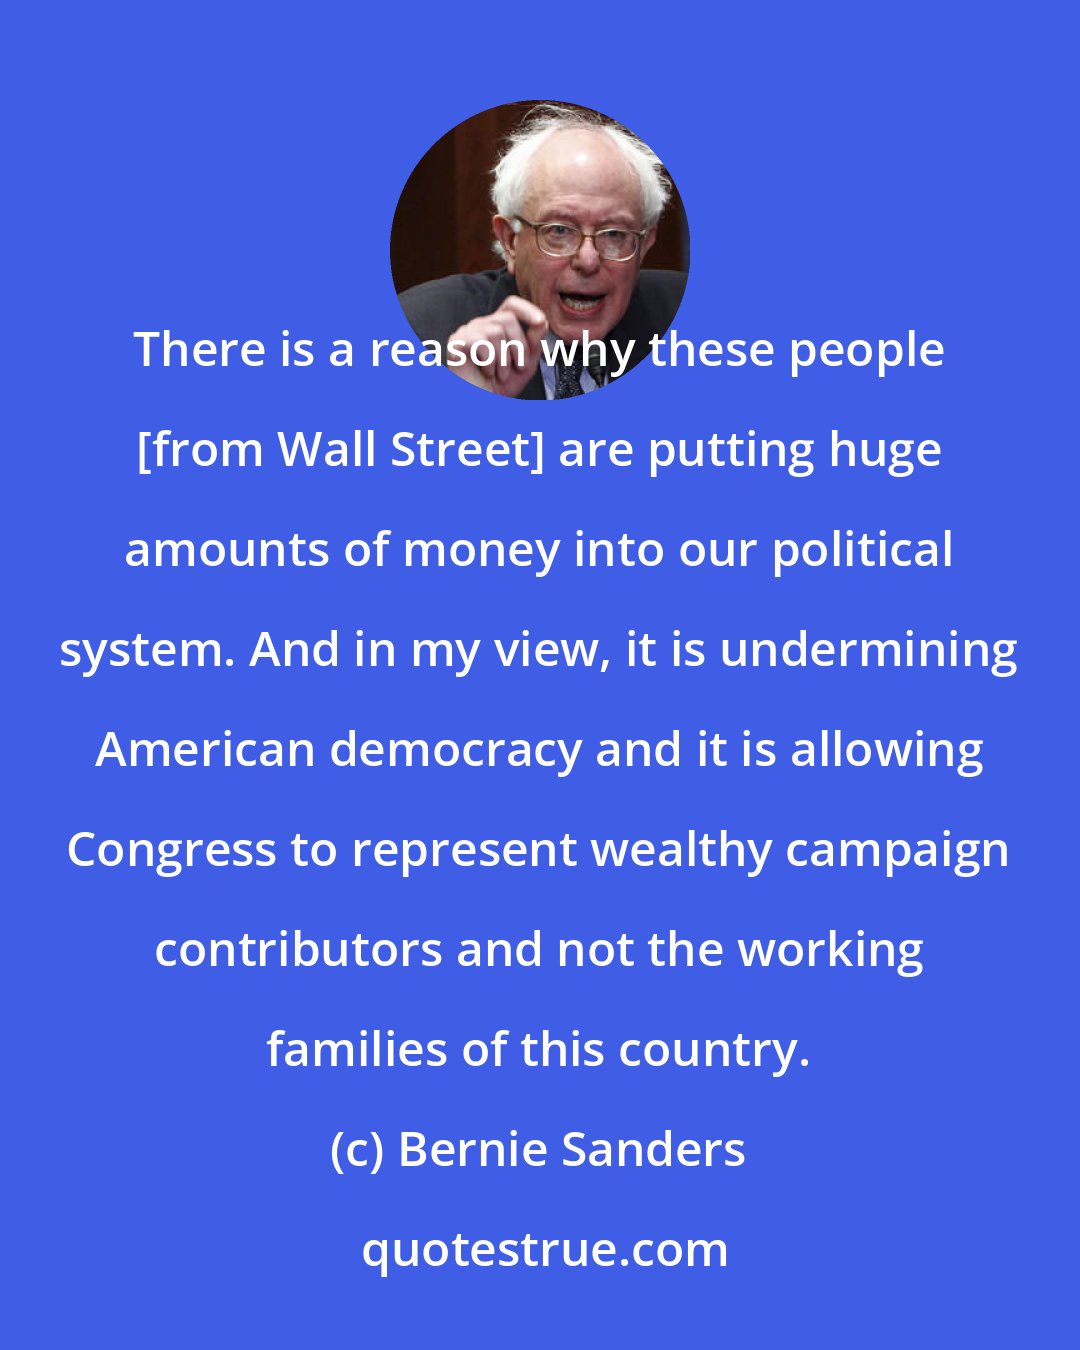 Bernie Sanders: There is a reason why these people [from Wall Street] are putting huge amounts of money into our political system. And in my view, it is undermining American democracy and it is allowing Congress to represent wealthy campaign contributors and not the working families of this country.